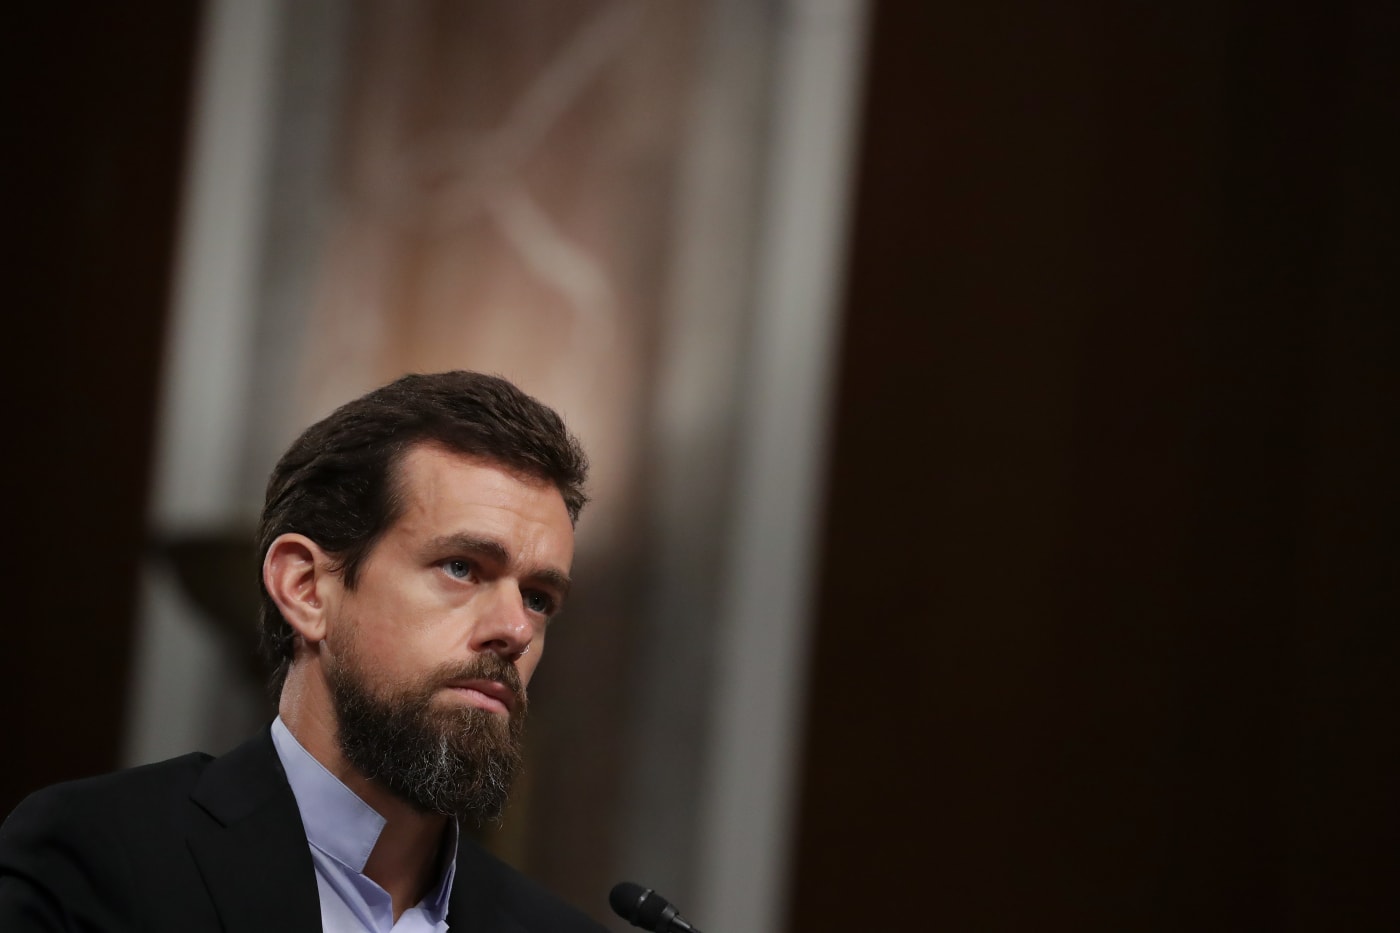 Why Jack Dorsey thought Elon Musk could fix Twitter